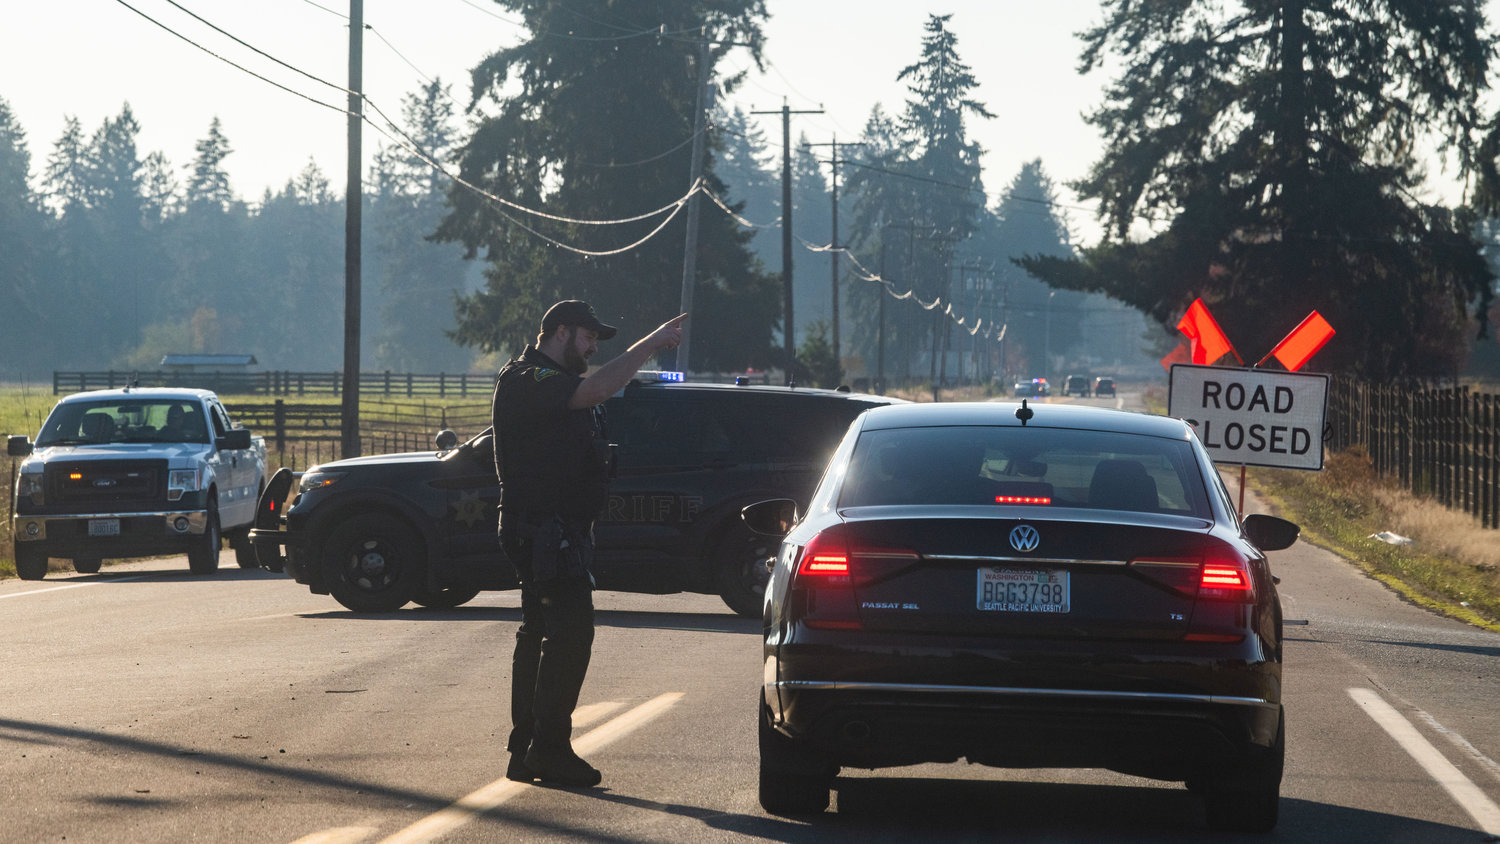 A Thurston County Sheriff Deputy gives directions to drivers navigating road closures on Monday while law enforcement investigates the scene of an officer involved shooting along Old Highway 99 SE in Tenino.